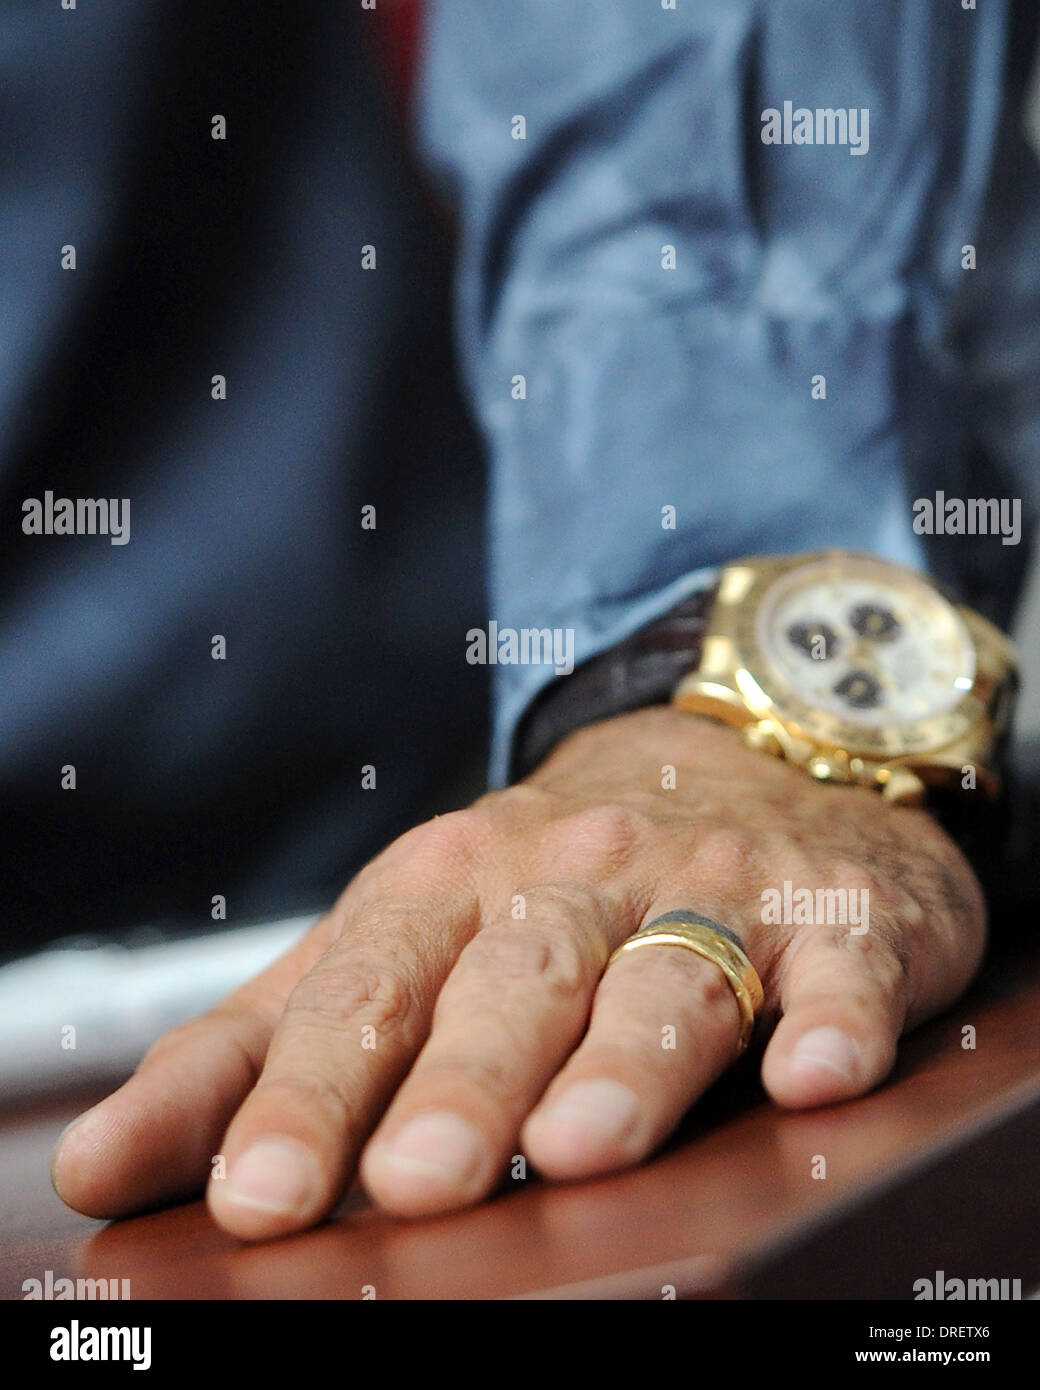 Marc Anthony still wearing his wedding ring, opens Obama For America  Campaign Office in Little Havana. Miami, Florida - 02.08.12 Stock Photo -  Alamy